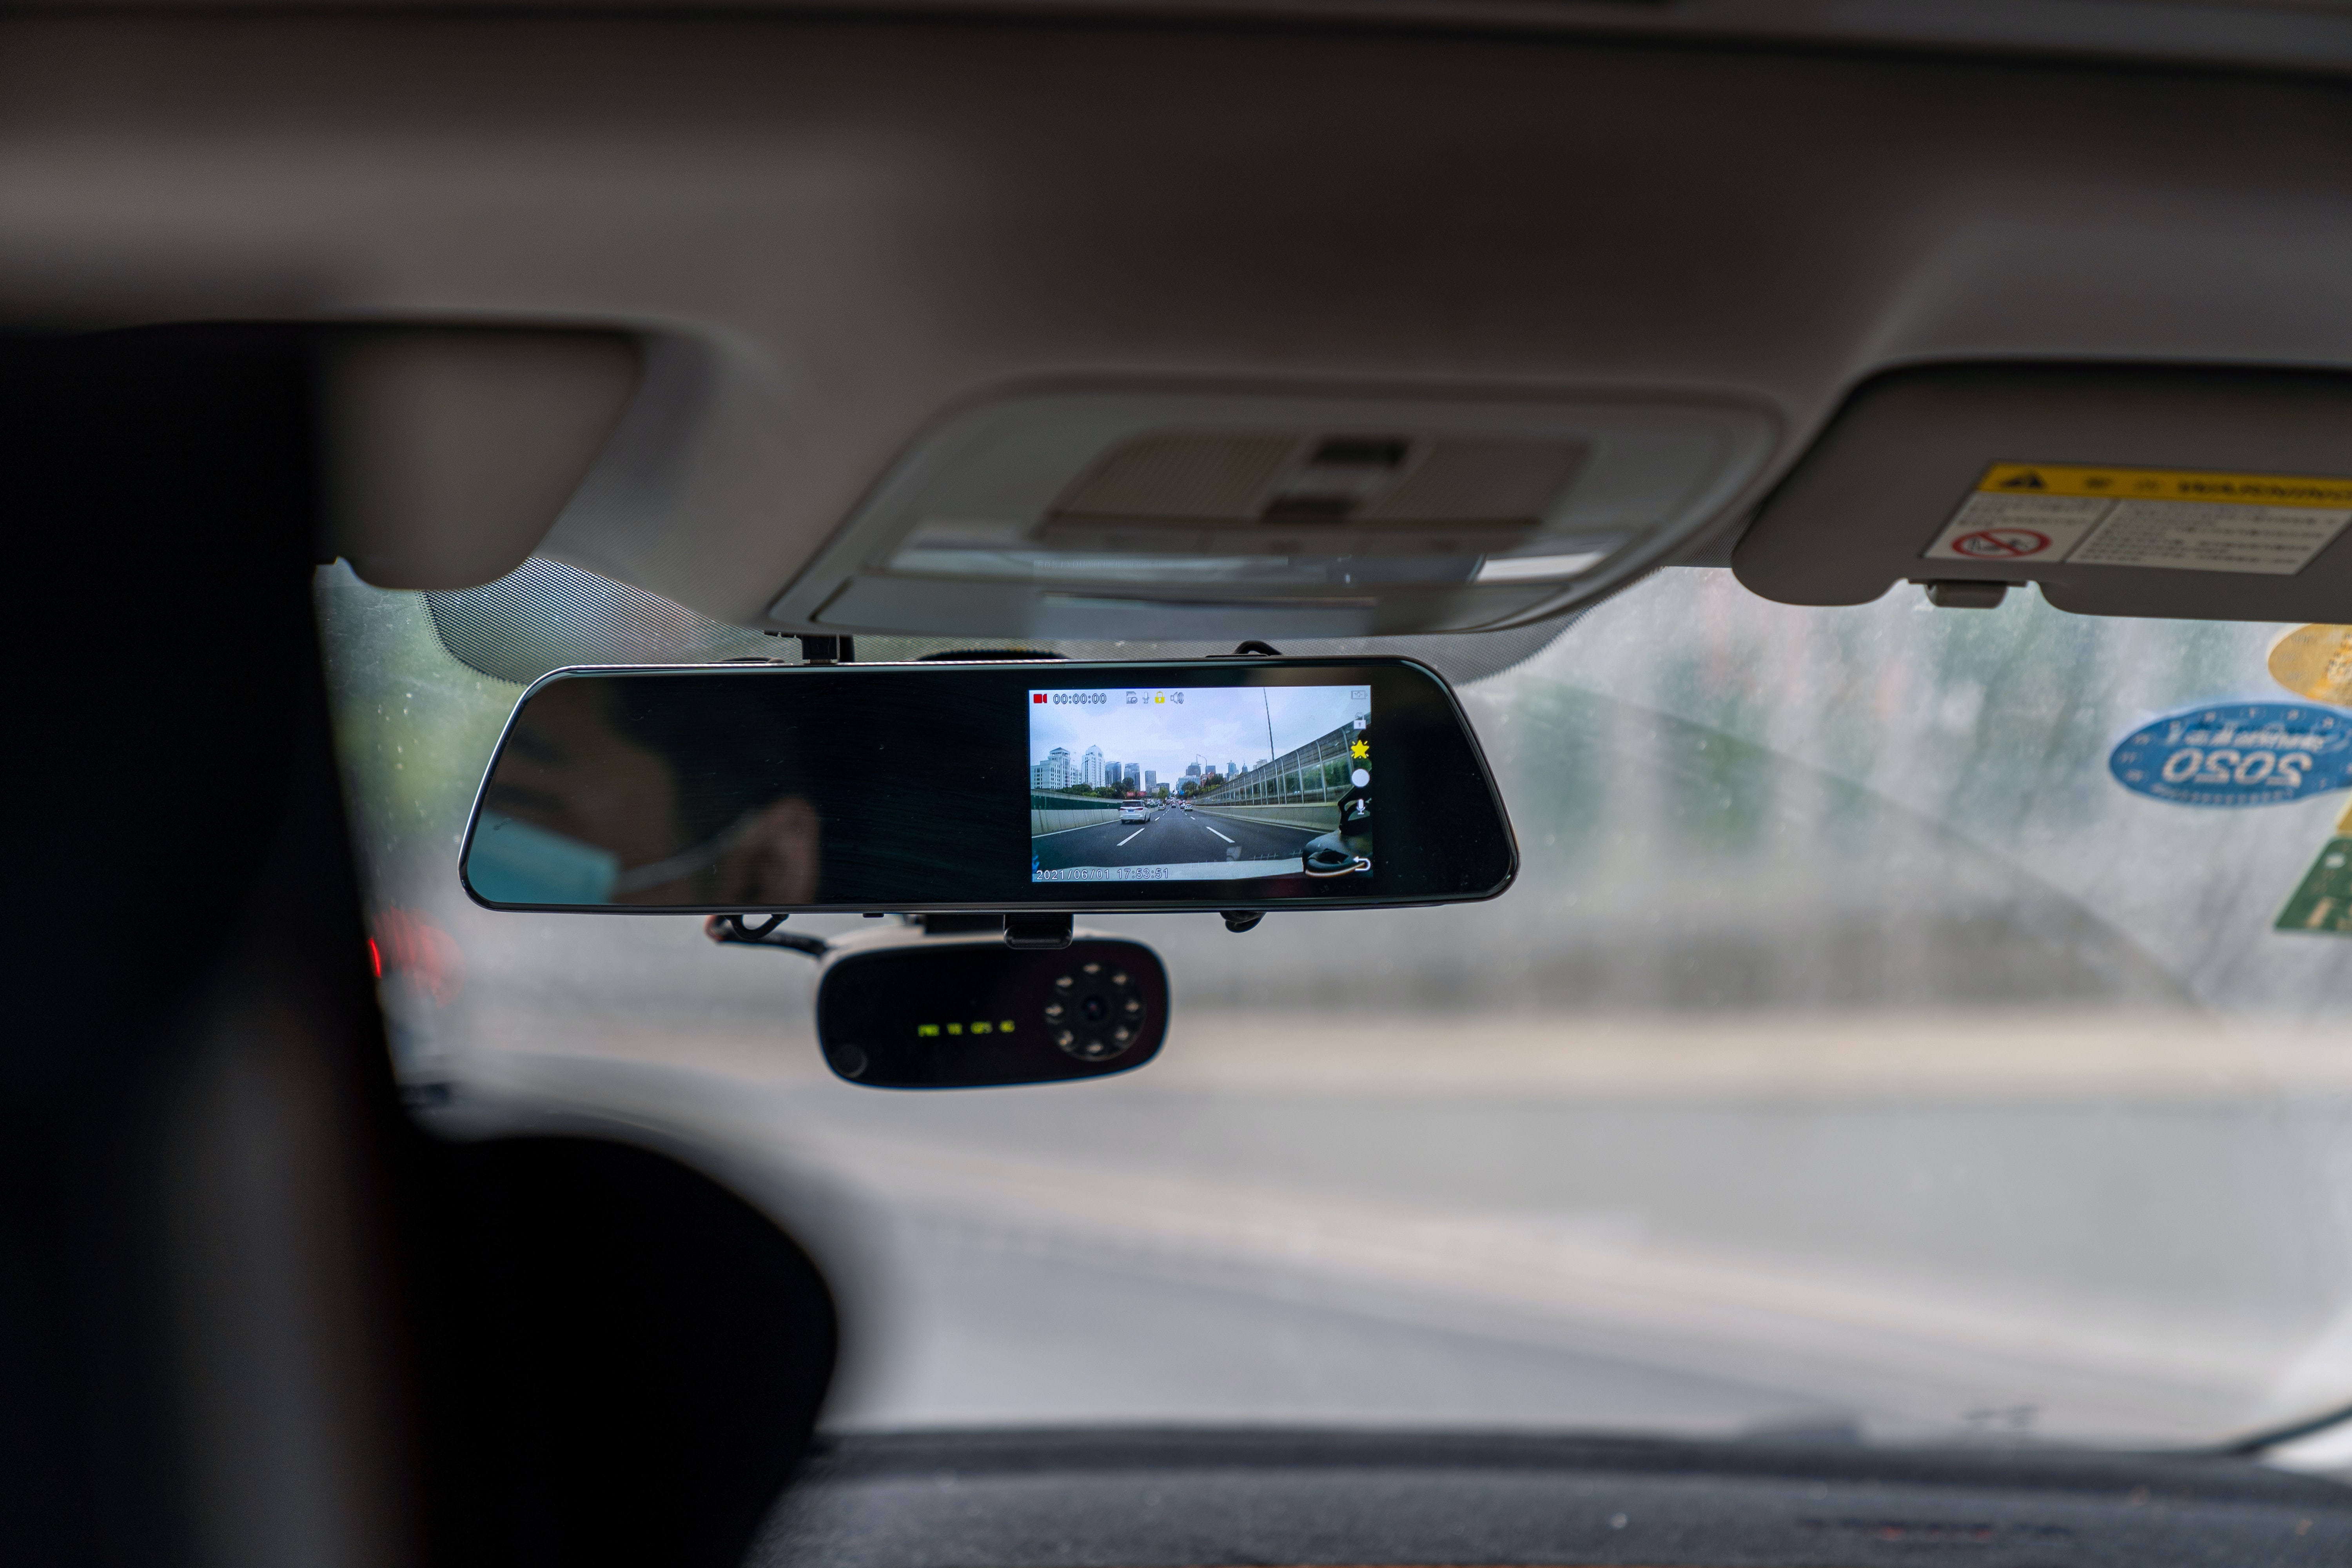 The Legality of Dashcam Footage